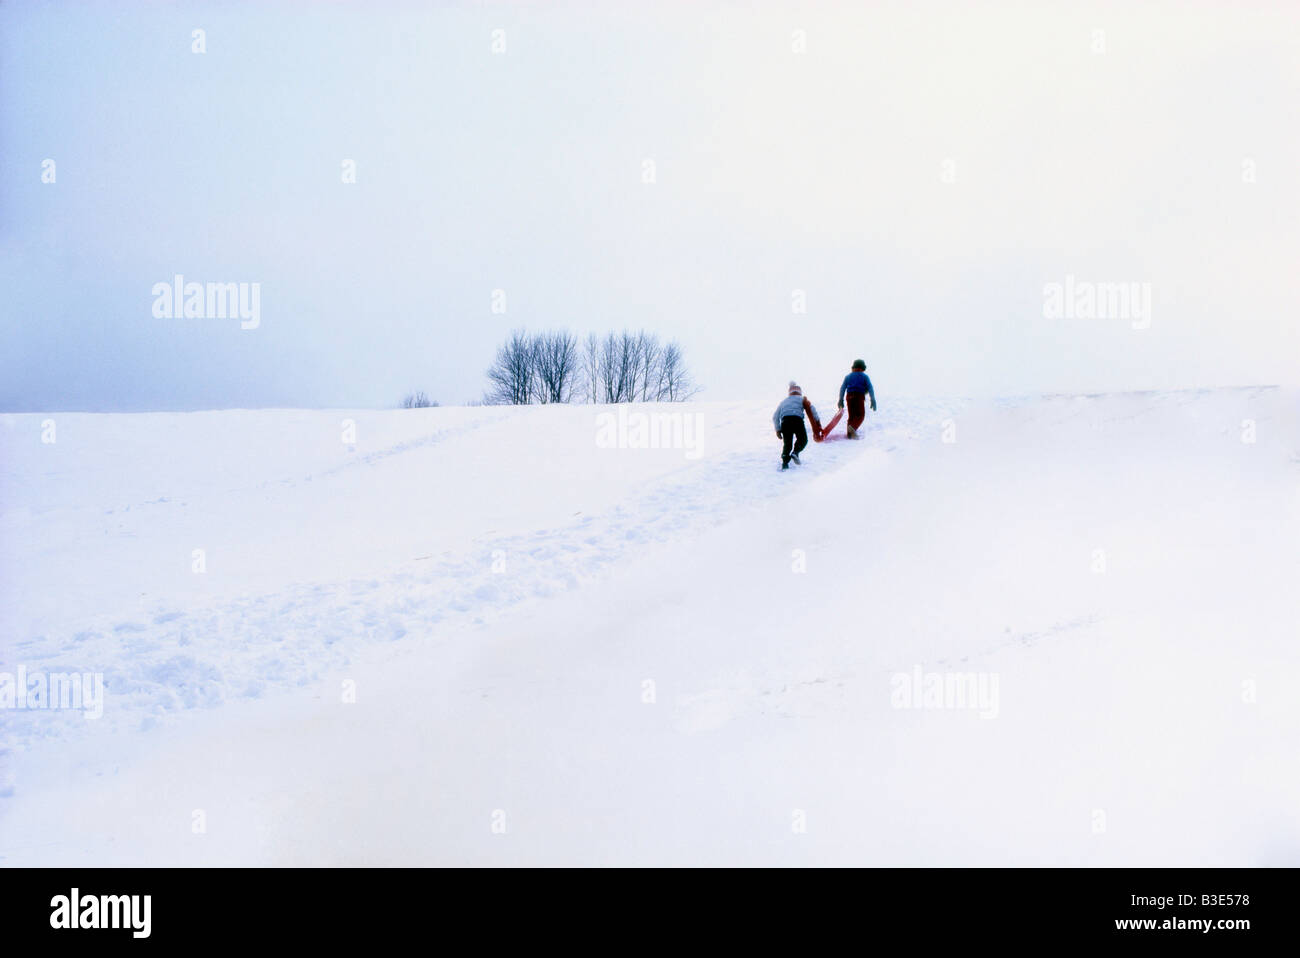 Boys pulling sled up snowy hill Stock Photo